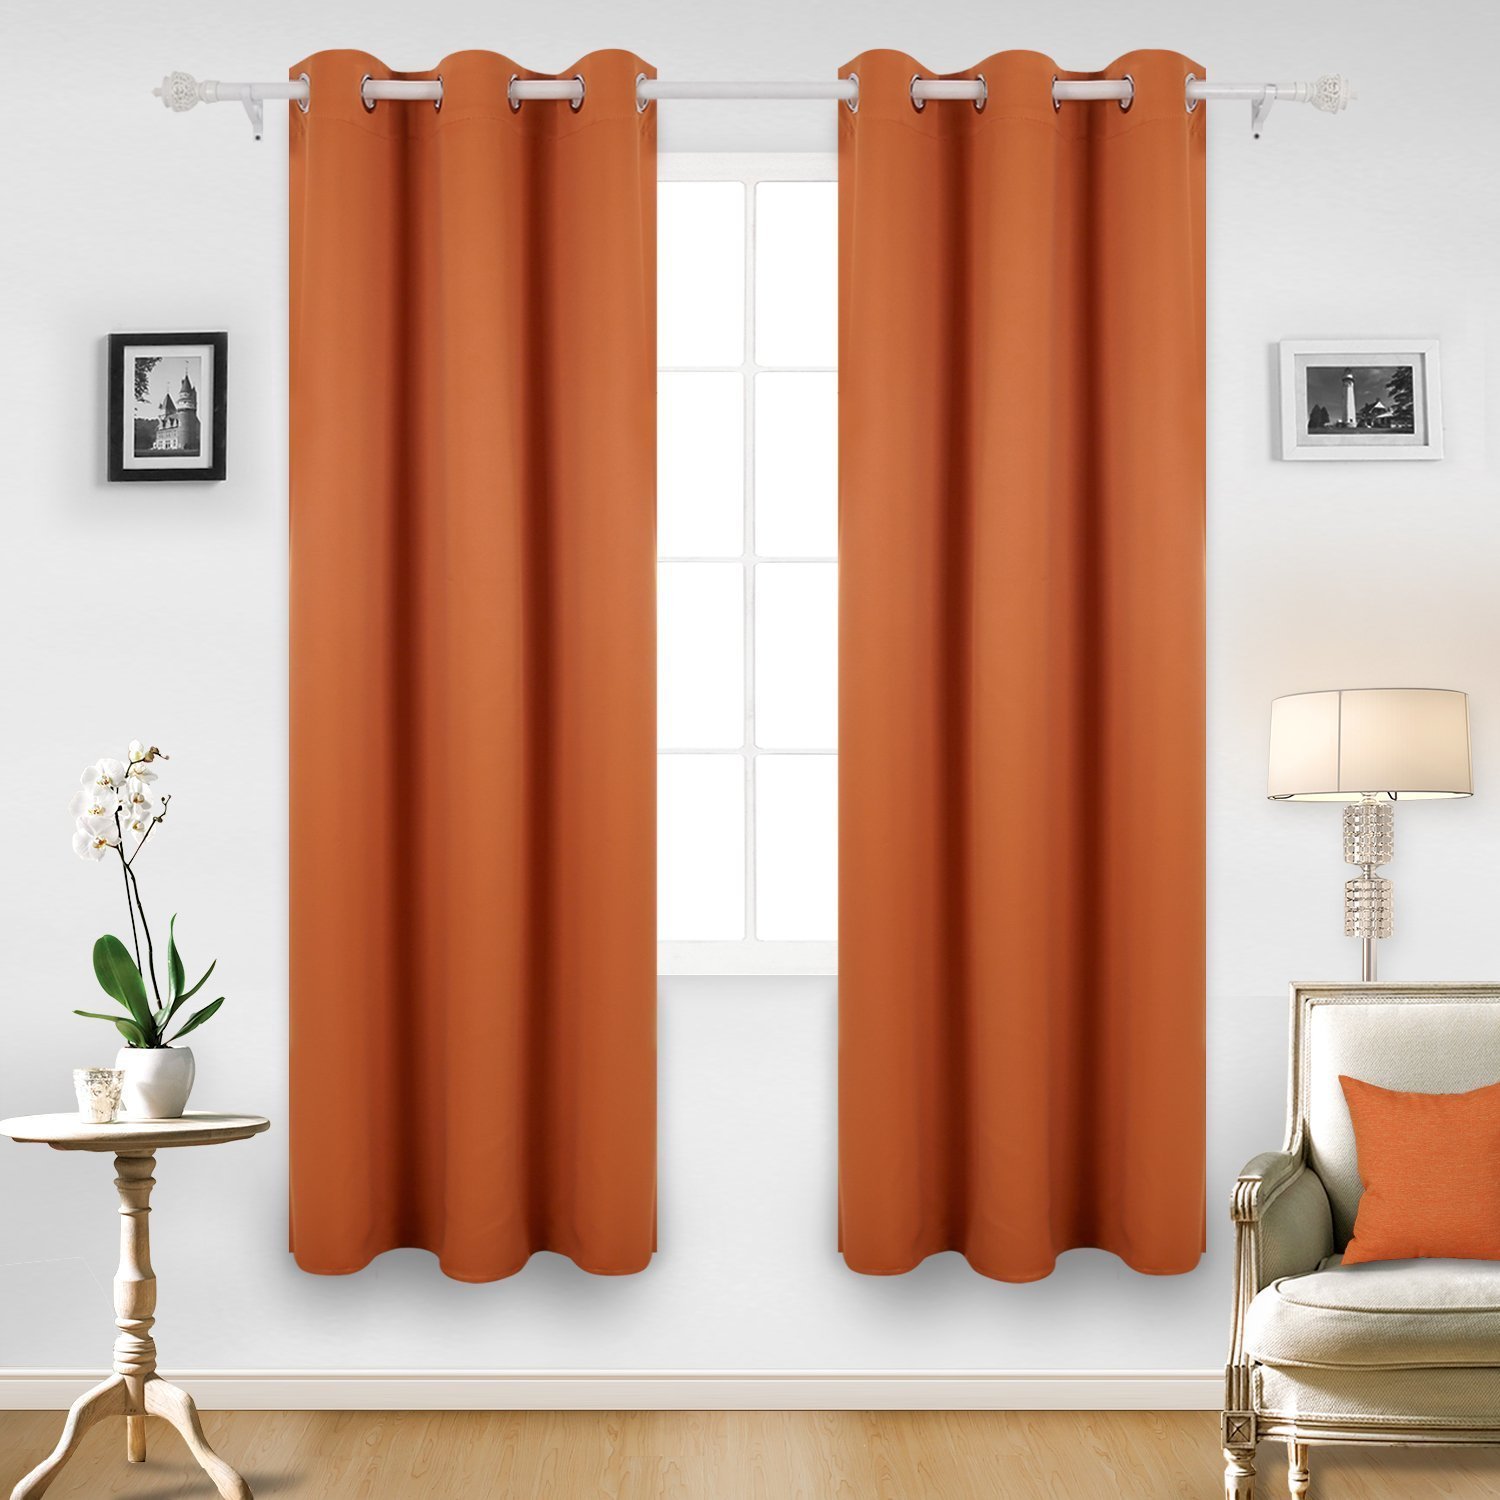 Details about   Superman Thicken Blackout Curtains 2 Panels Bedroom Thermal Window Drapes Gifts 